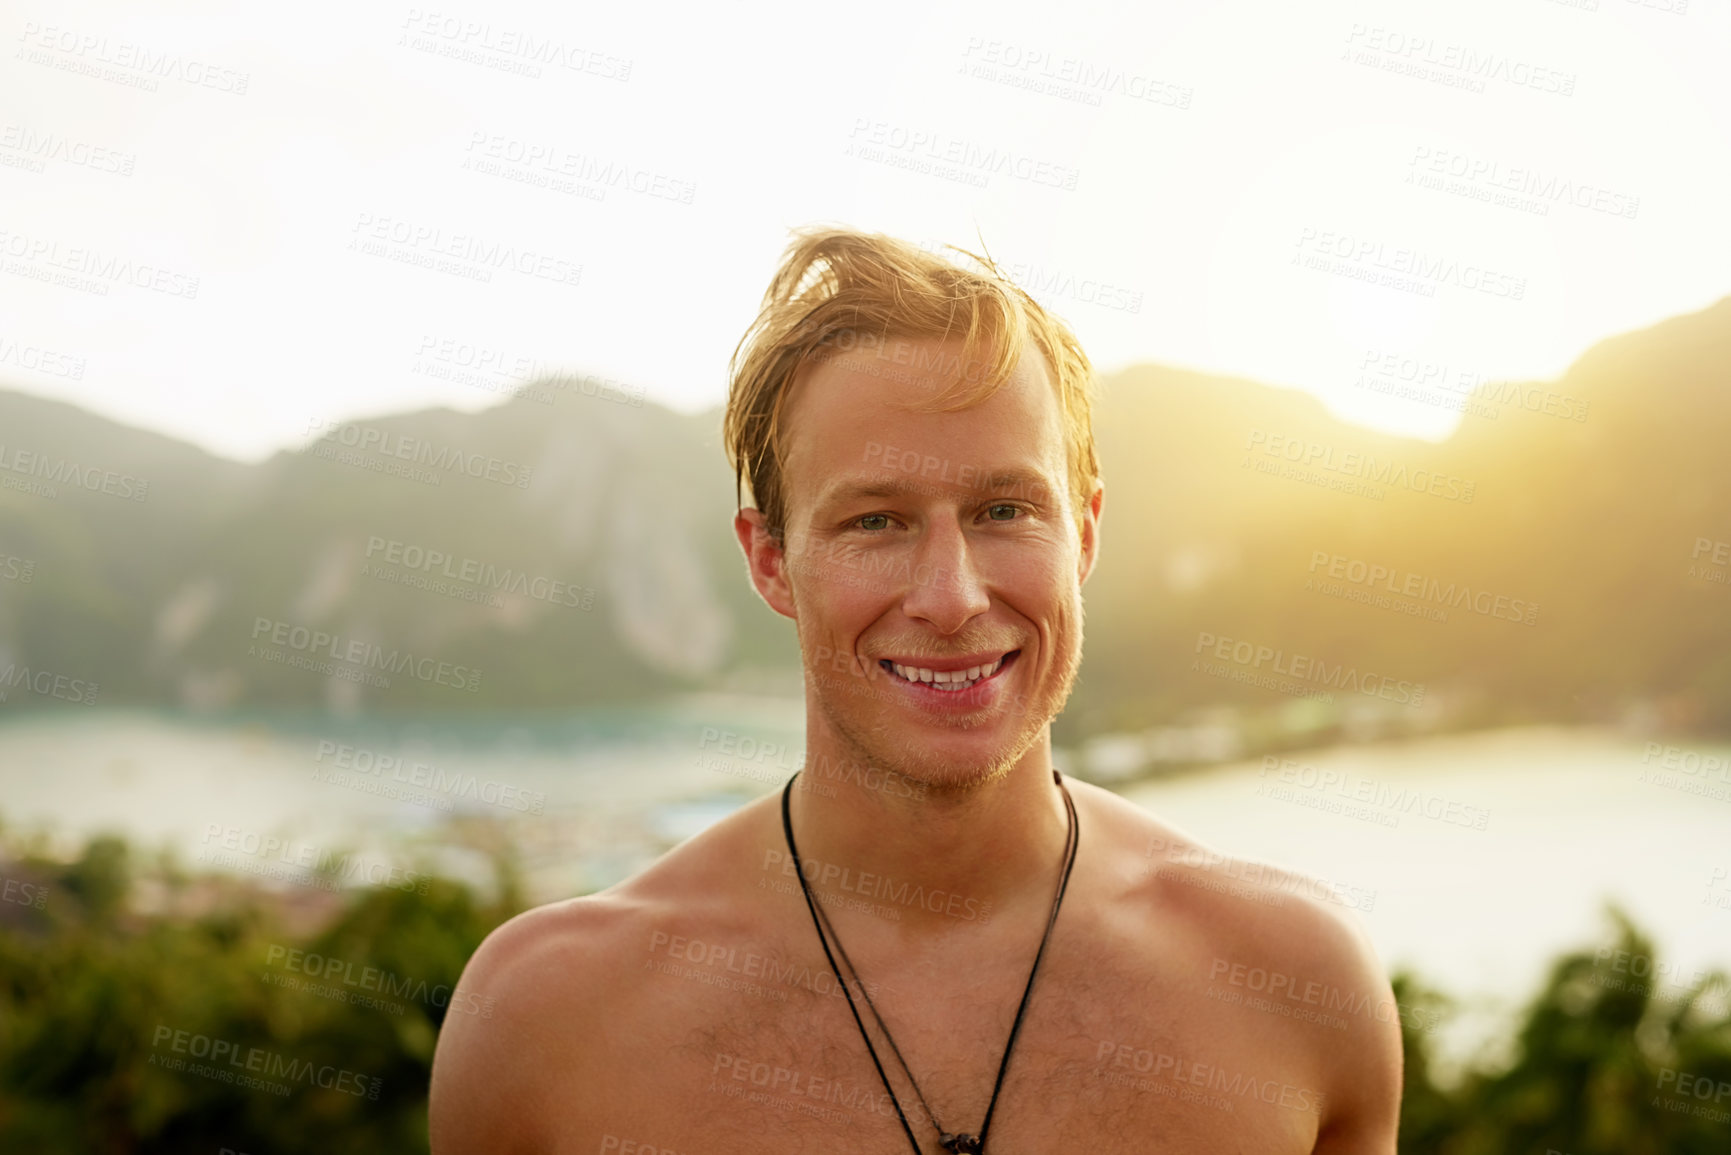 Buy stock photo Portrait of a happy young man admiring a tropical view while on holiday